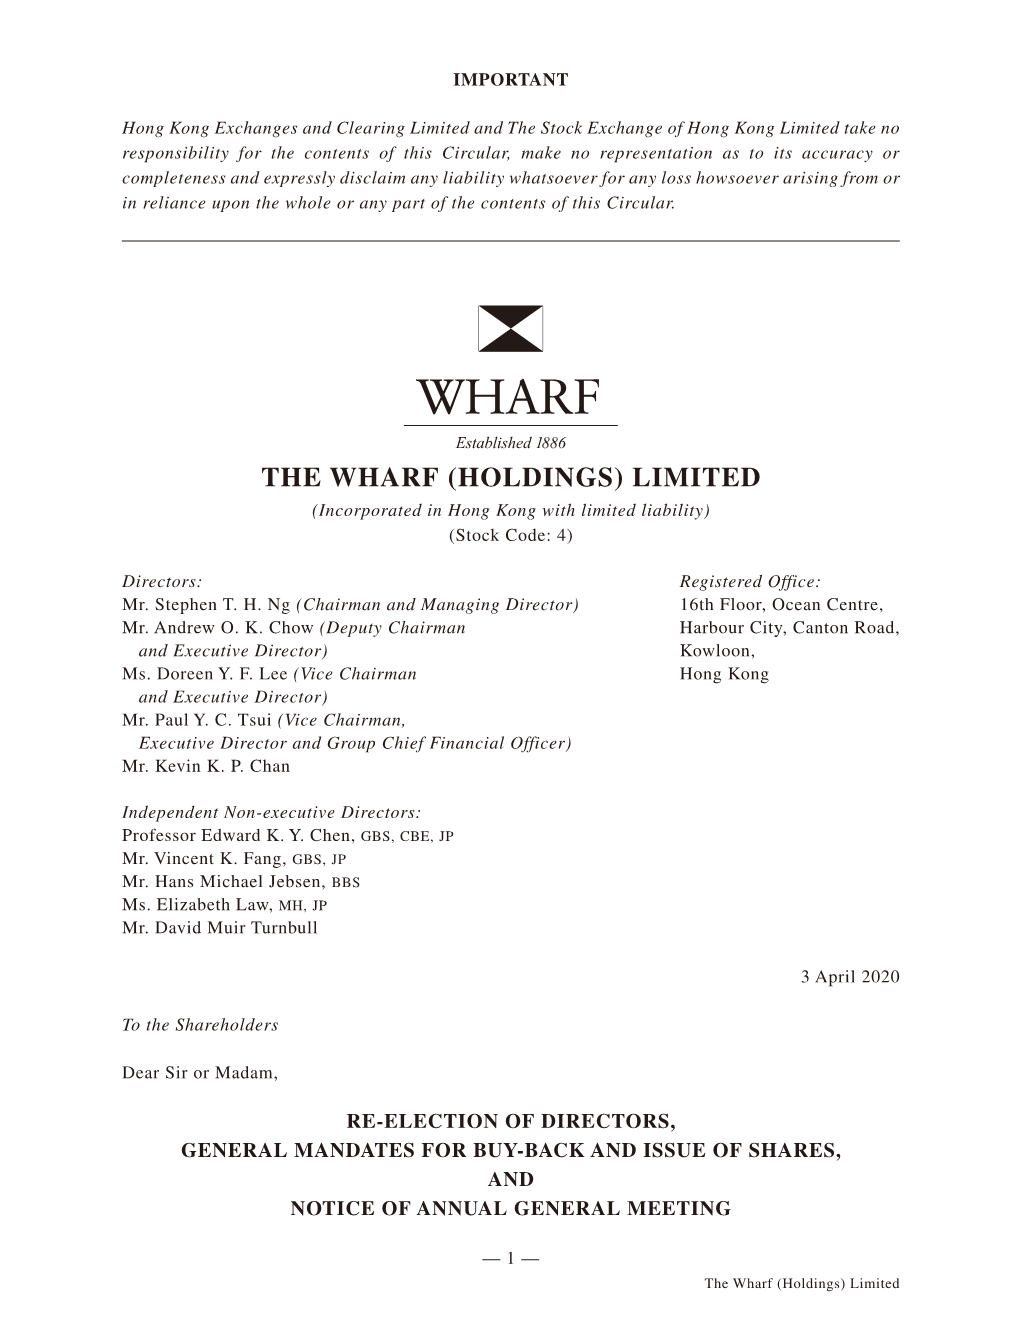 THE WHARF (HOLDINGS) LIMITED (Incorporated in Hong Kong with Limited Liability) (Stock Code: 4)